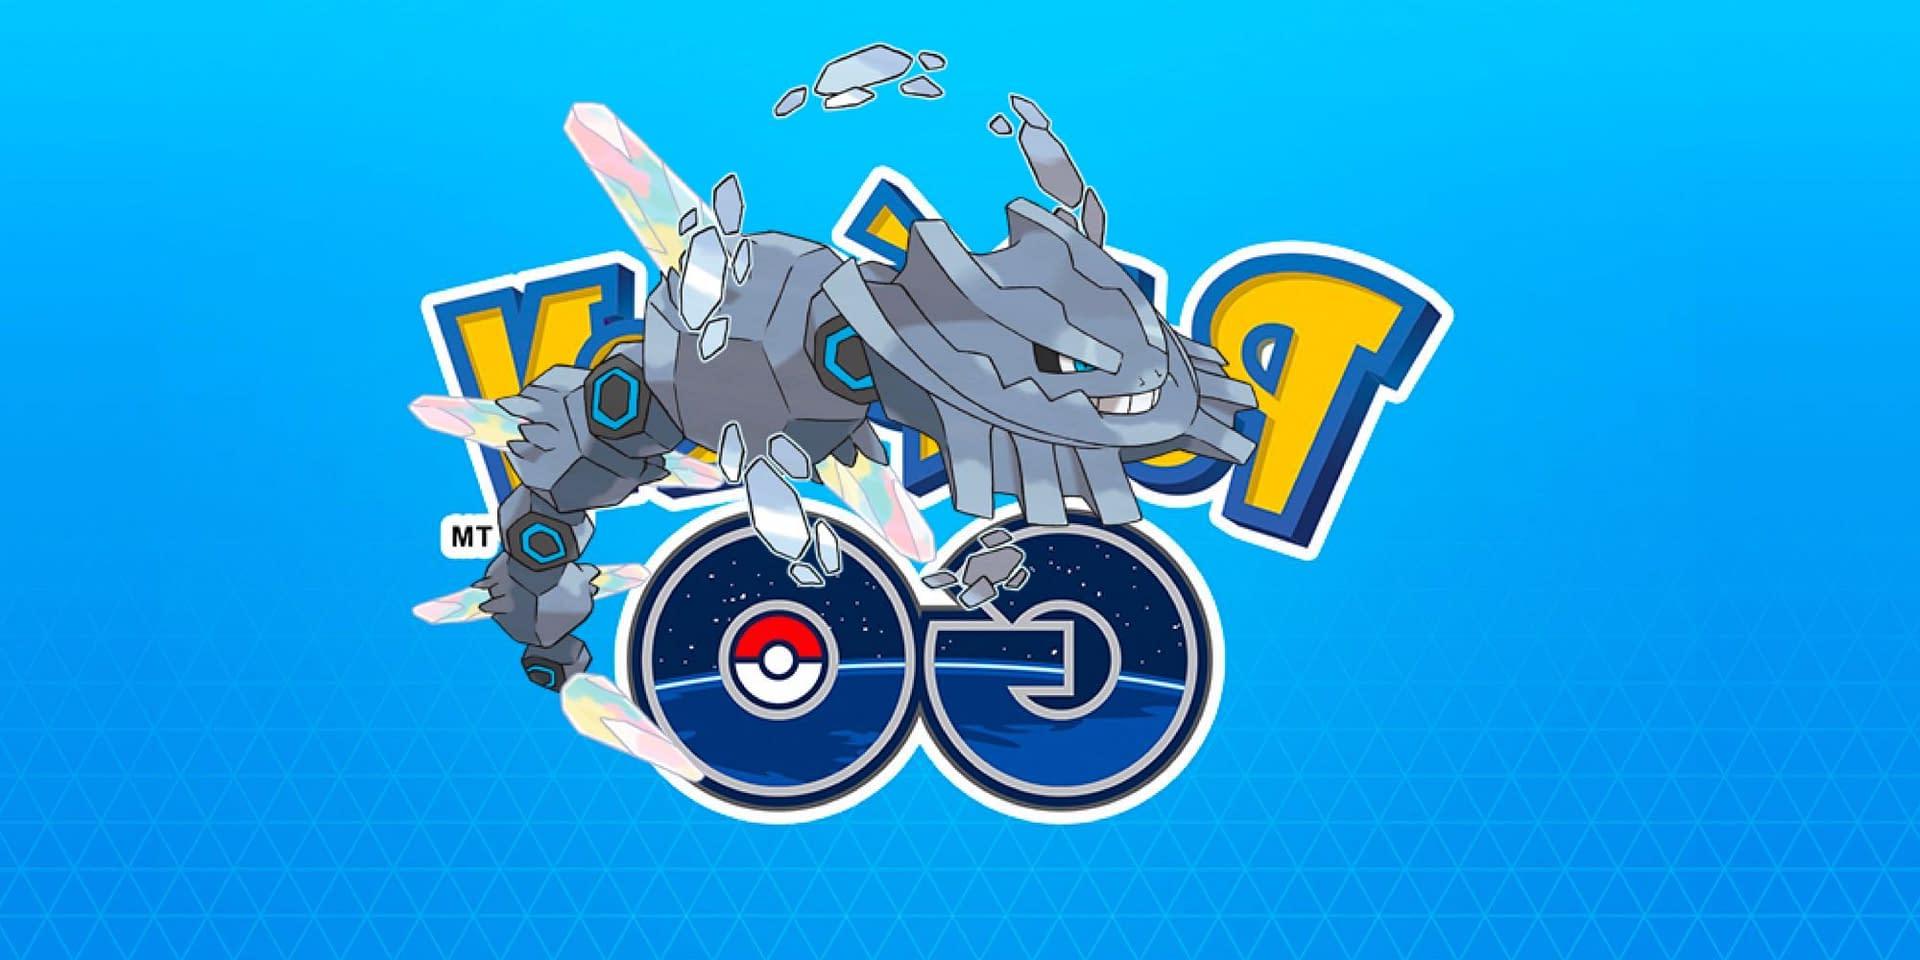 2023 brings a new advertance with Pokemon GO. These rotations revolve around the Legendary Fire/Dragon-type Reshiram in Tier Five Raids and Mega Steelix in Mega Raids. It has to be seen in New Year's 2023 outfits. This raid guide helps you to take on Mega Steelix in Pokemon GO, build [] [] [] of Pokemon GO, and build [][] the []spanic platform.